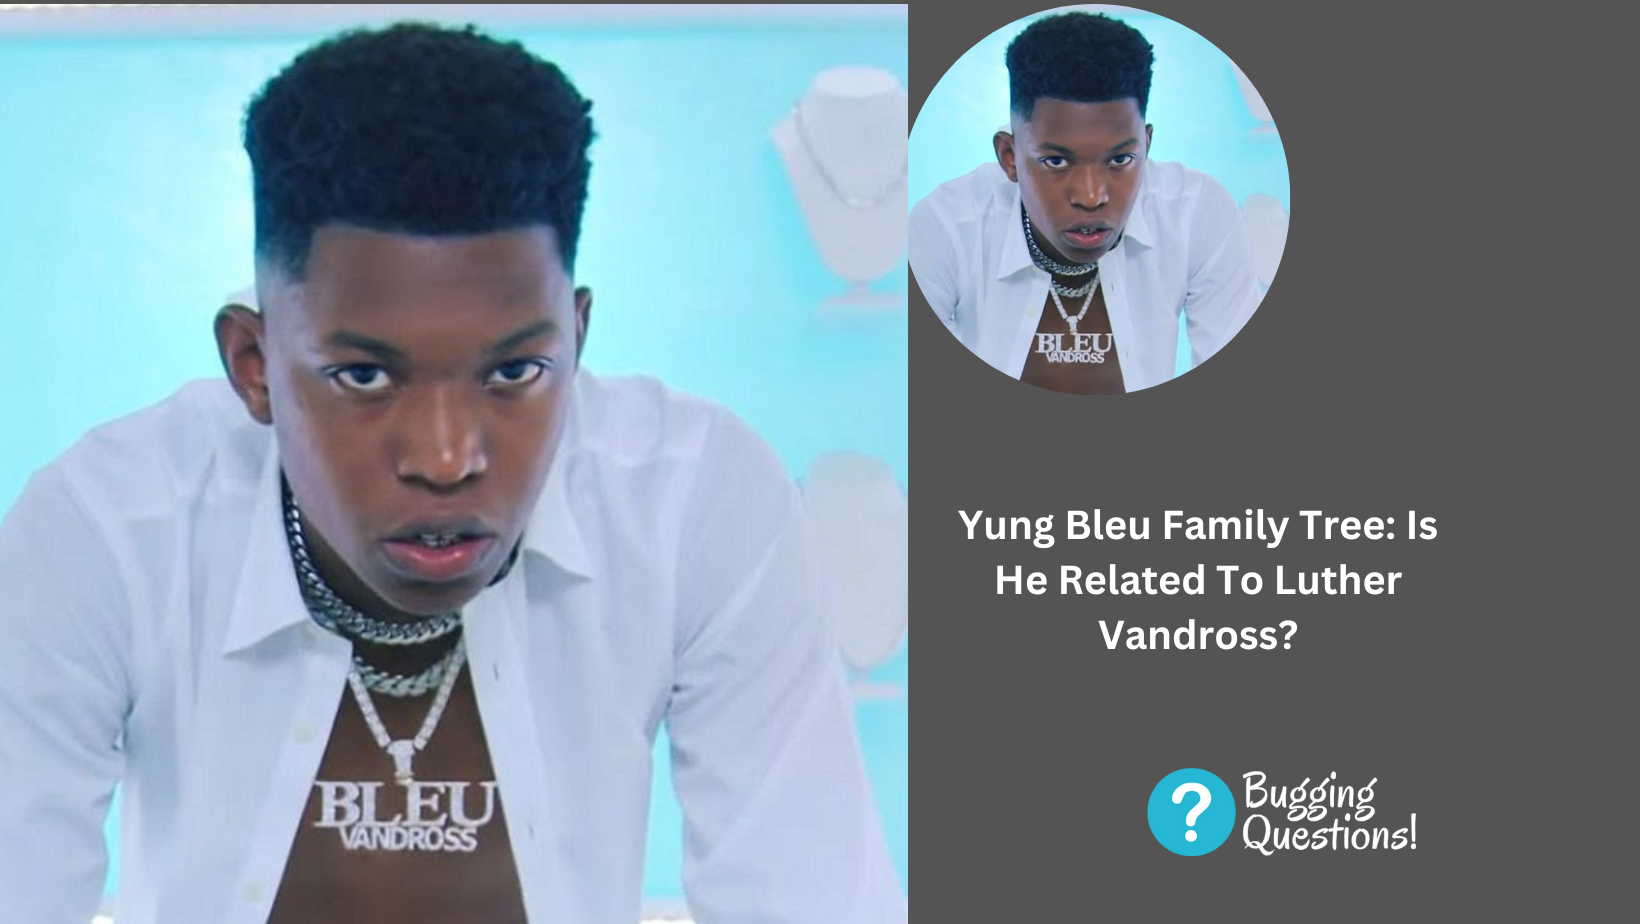 Yung Bleu Family Tree: Is He Related To Luther Vandross?